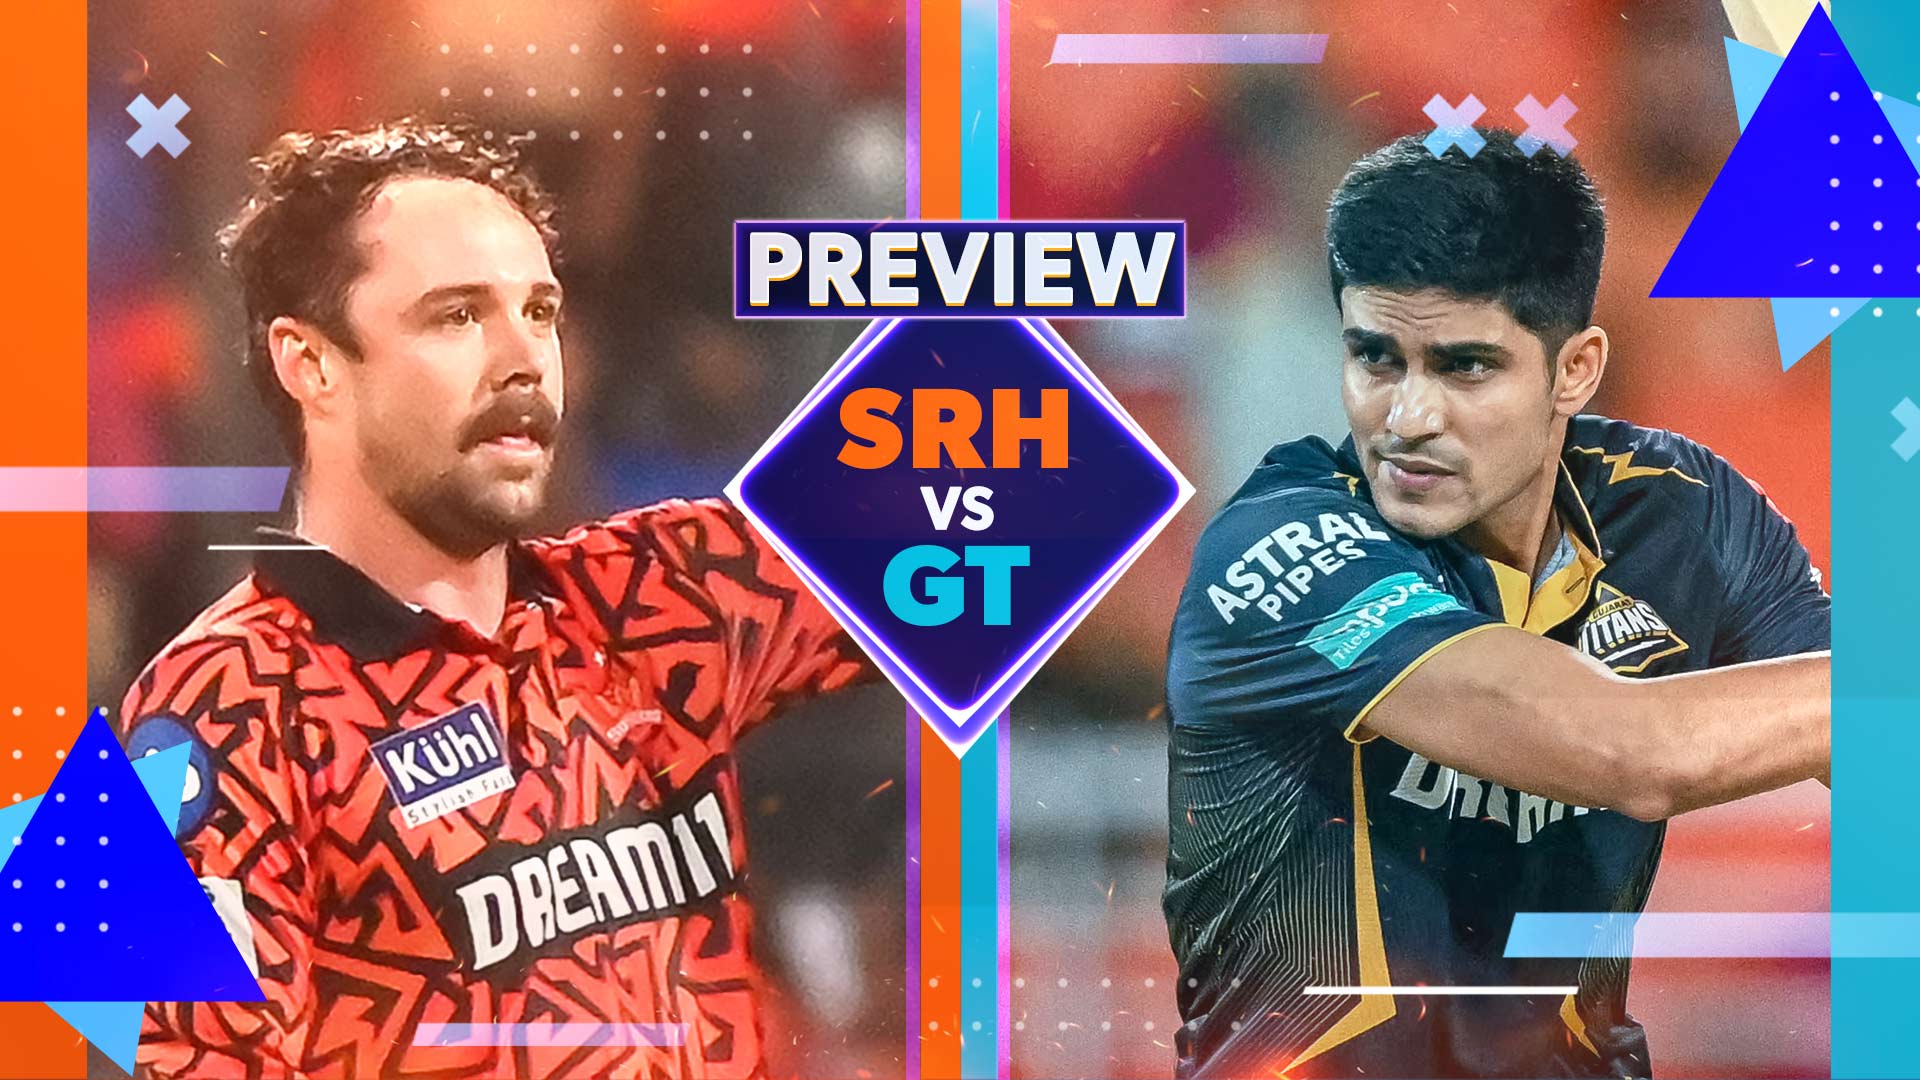 SRH vs GT: All You Need to Know